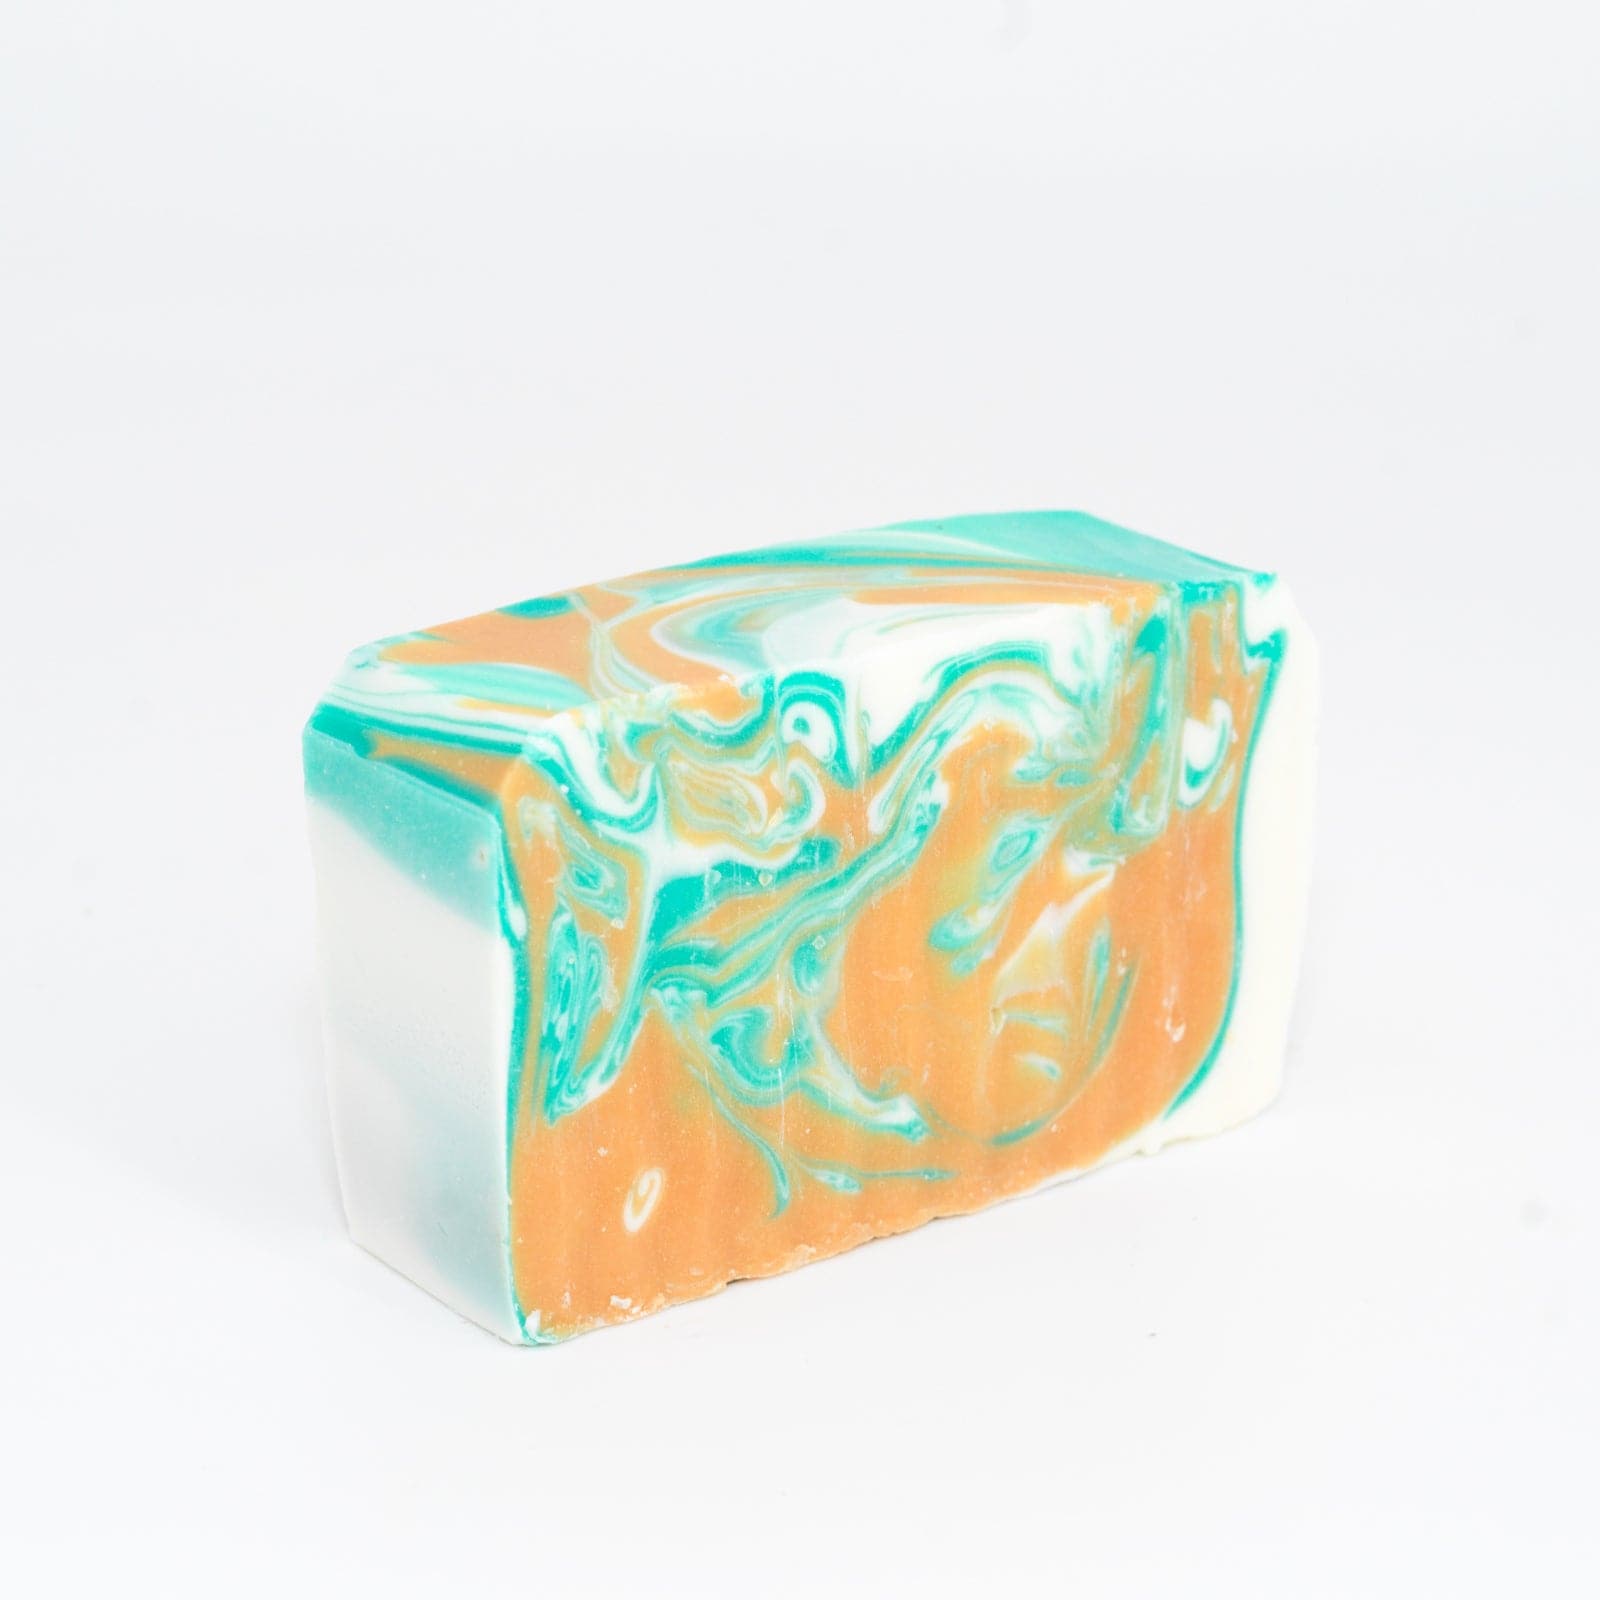 angled right view of a teal, orange, and white Narcissist Soap Bar